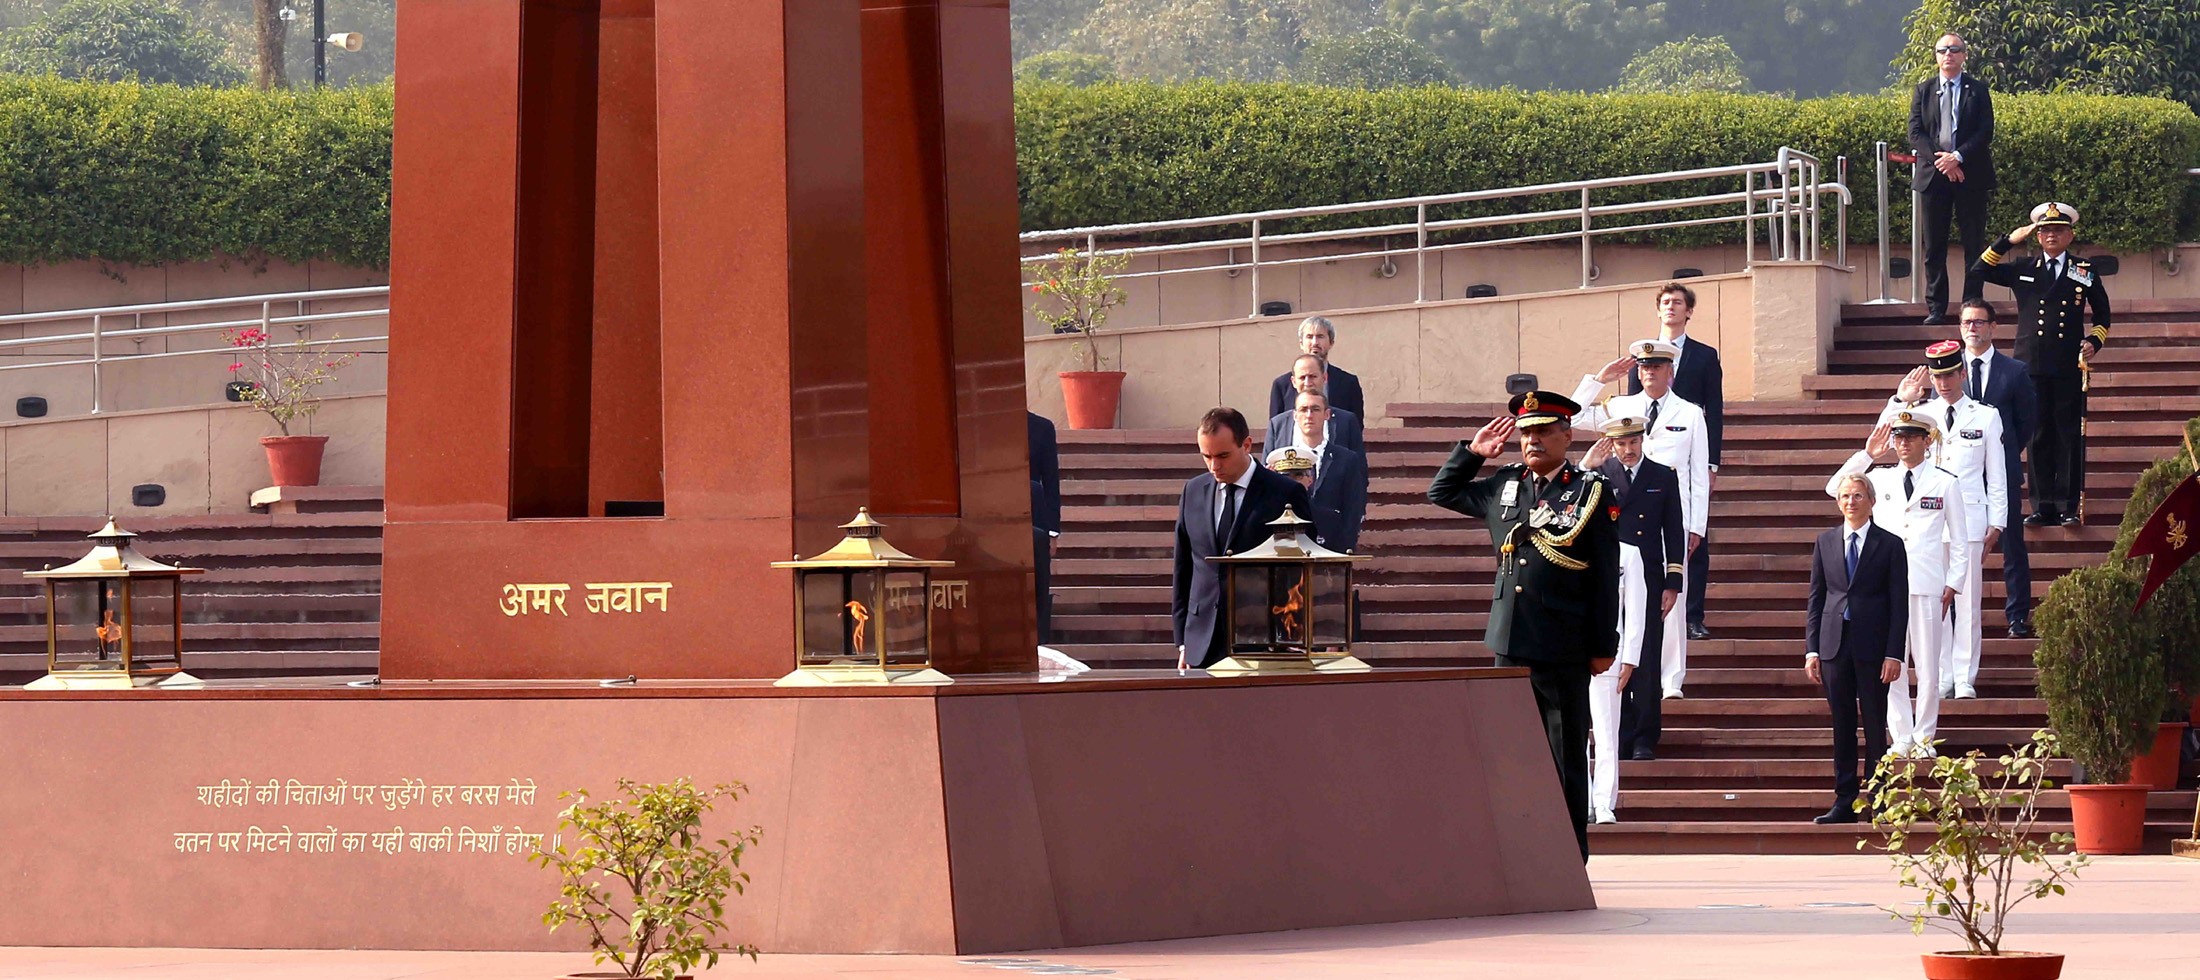 The Minister of Armed Forces of the French Republic, Mr. Sebastien Lecornu paying homage to the fallen heroes at National War Memorial, in New Delhi on November 28, 2022.